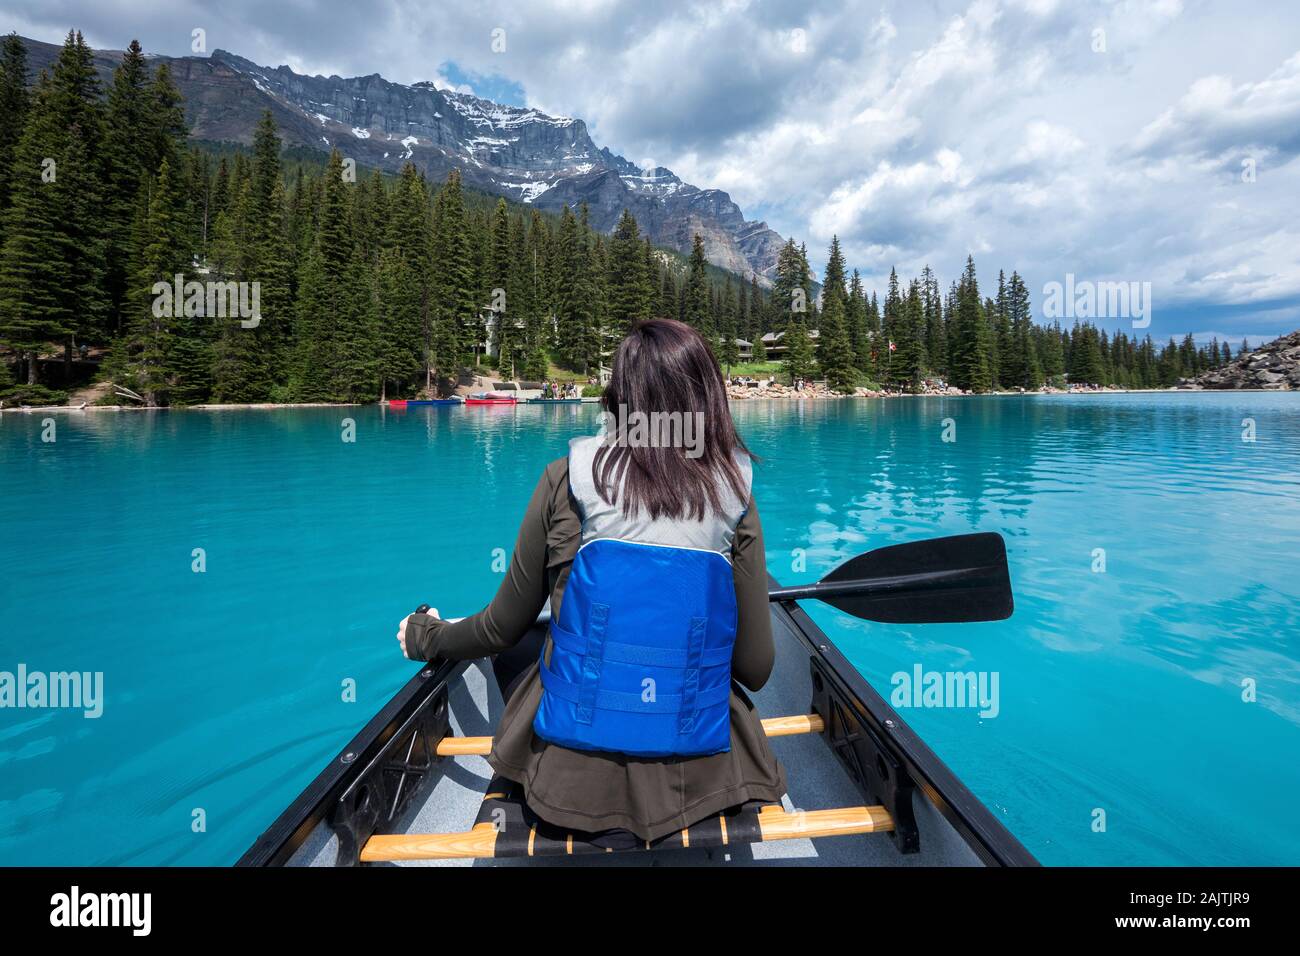 Tourist canoeing on Moraine Lake during summer in Banff National Park, Canadian Rockies, Alberta, Canada. Stock Photo